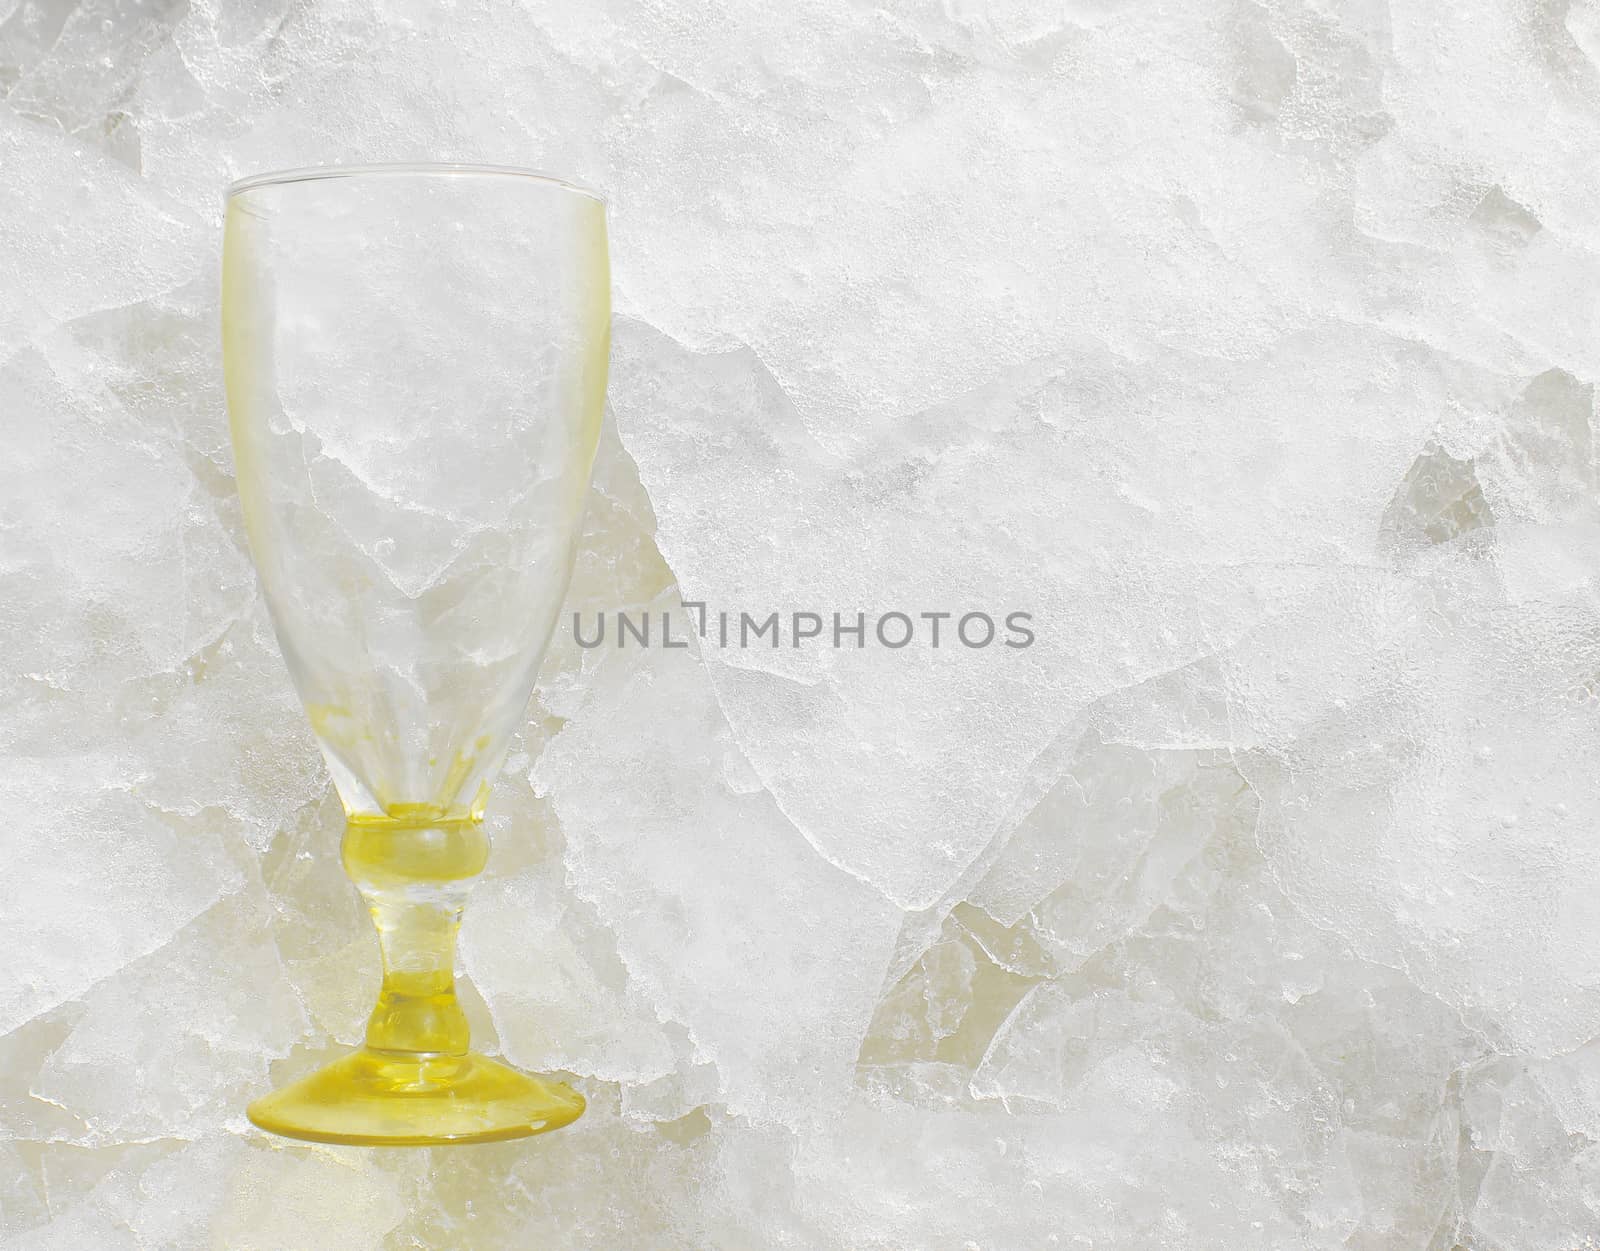 Empty Wine Glass on Ice Slabs Shards by RichieThakur